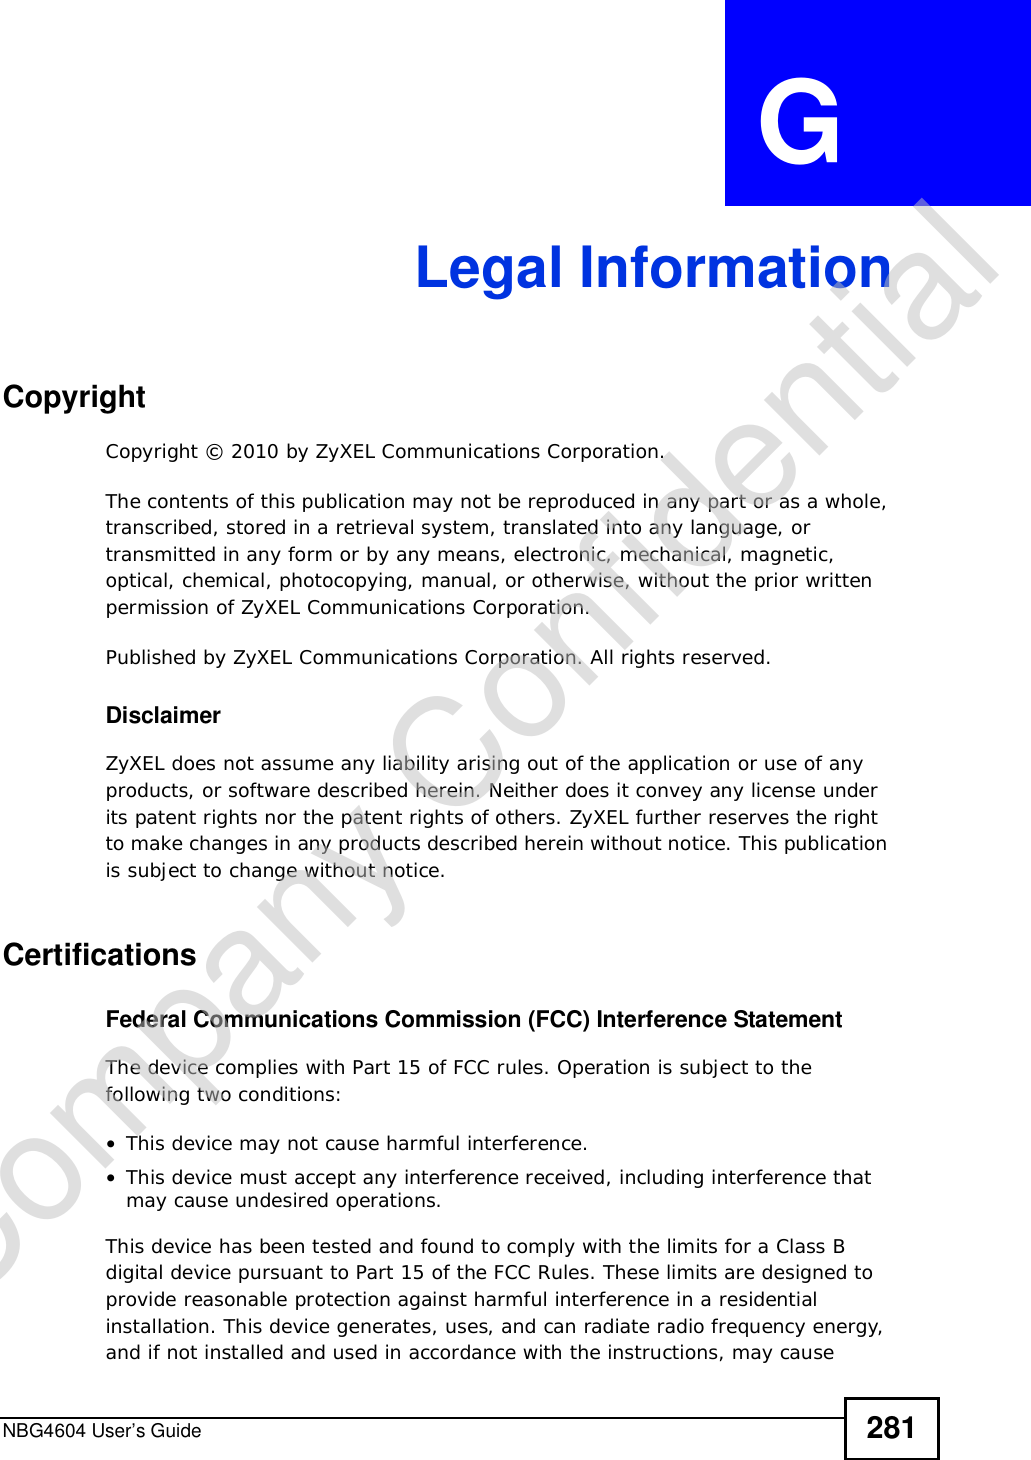 NBG4604 User’s Guide 281APPENDIX  G Legal InformationCopyrightCopyright © 2010 by ZyXEL Communications Corporation.The contents of this publication may not be reproduced in any part or as a whole, transcribed, stored in a retrieval system, translated into any language, or transmitted in any form or by any means, electronic, mechanical, magnetic, optical, chemical, photocopying, manual, or otherwise, without the prior written permission of ZyXEL Communications Corporation.Published by ZyXEL Communications Corporation. All rights reserved.DisclaimerZyXEL does not assume any liability arising out of the application or use of any products, or software described herein. Neither does it convey any license under its patent rights nor the patent rights of others. ZyXEL further reserves the right to make changes in any products described herein without notice. This publication is subject to change without notice.CertificationsFederal Communications Commission (FCC) Interference StatementThe device complies with Part 15 of FCC rules. Operation is subject to the following two conditions:•This device may not cause harmful interference.•This device must accept any interference received, including interference that may cause undesired operations.This device has been tested and found to comply with the limits for a Class B digital device pursuant to Part 15 of the FCC Rules. These limits are designed to provide reasonable protection against harmful interference in a residential installation. This device generates, uses, and can radiate radio frequency energy, and if not installed and used in accordance with the instructions, may cause Company Confidential